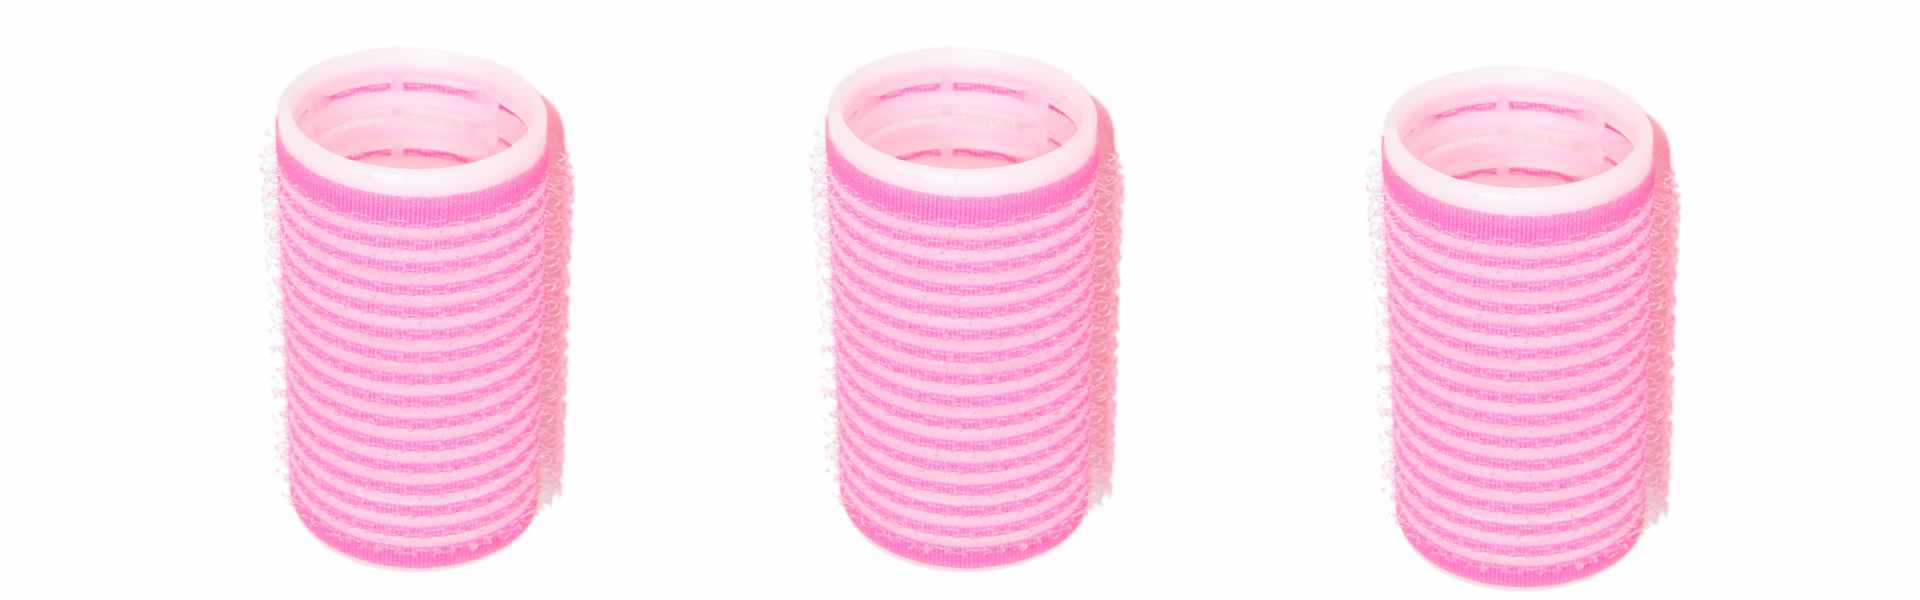 3 pink velcro rollers in a row